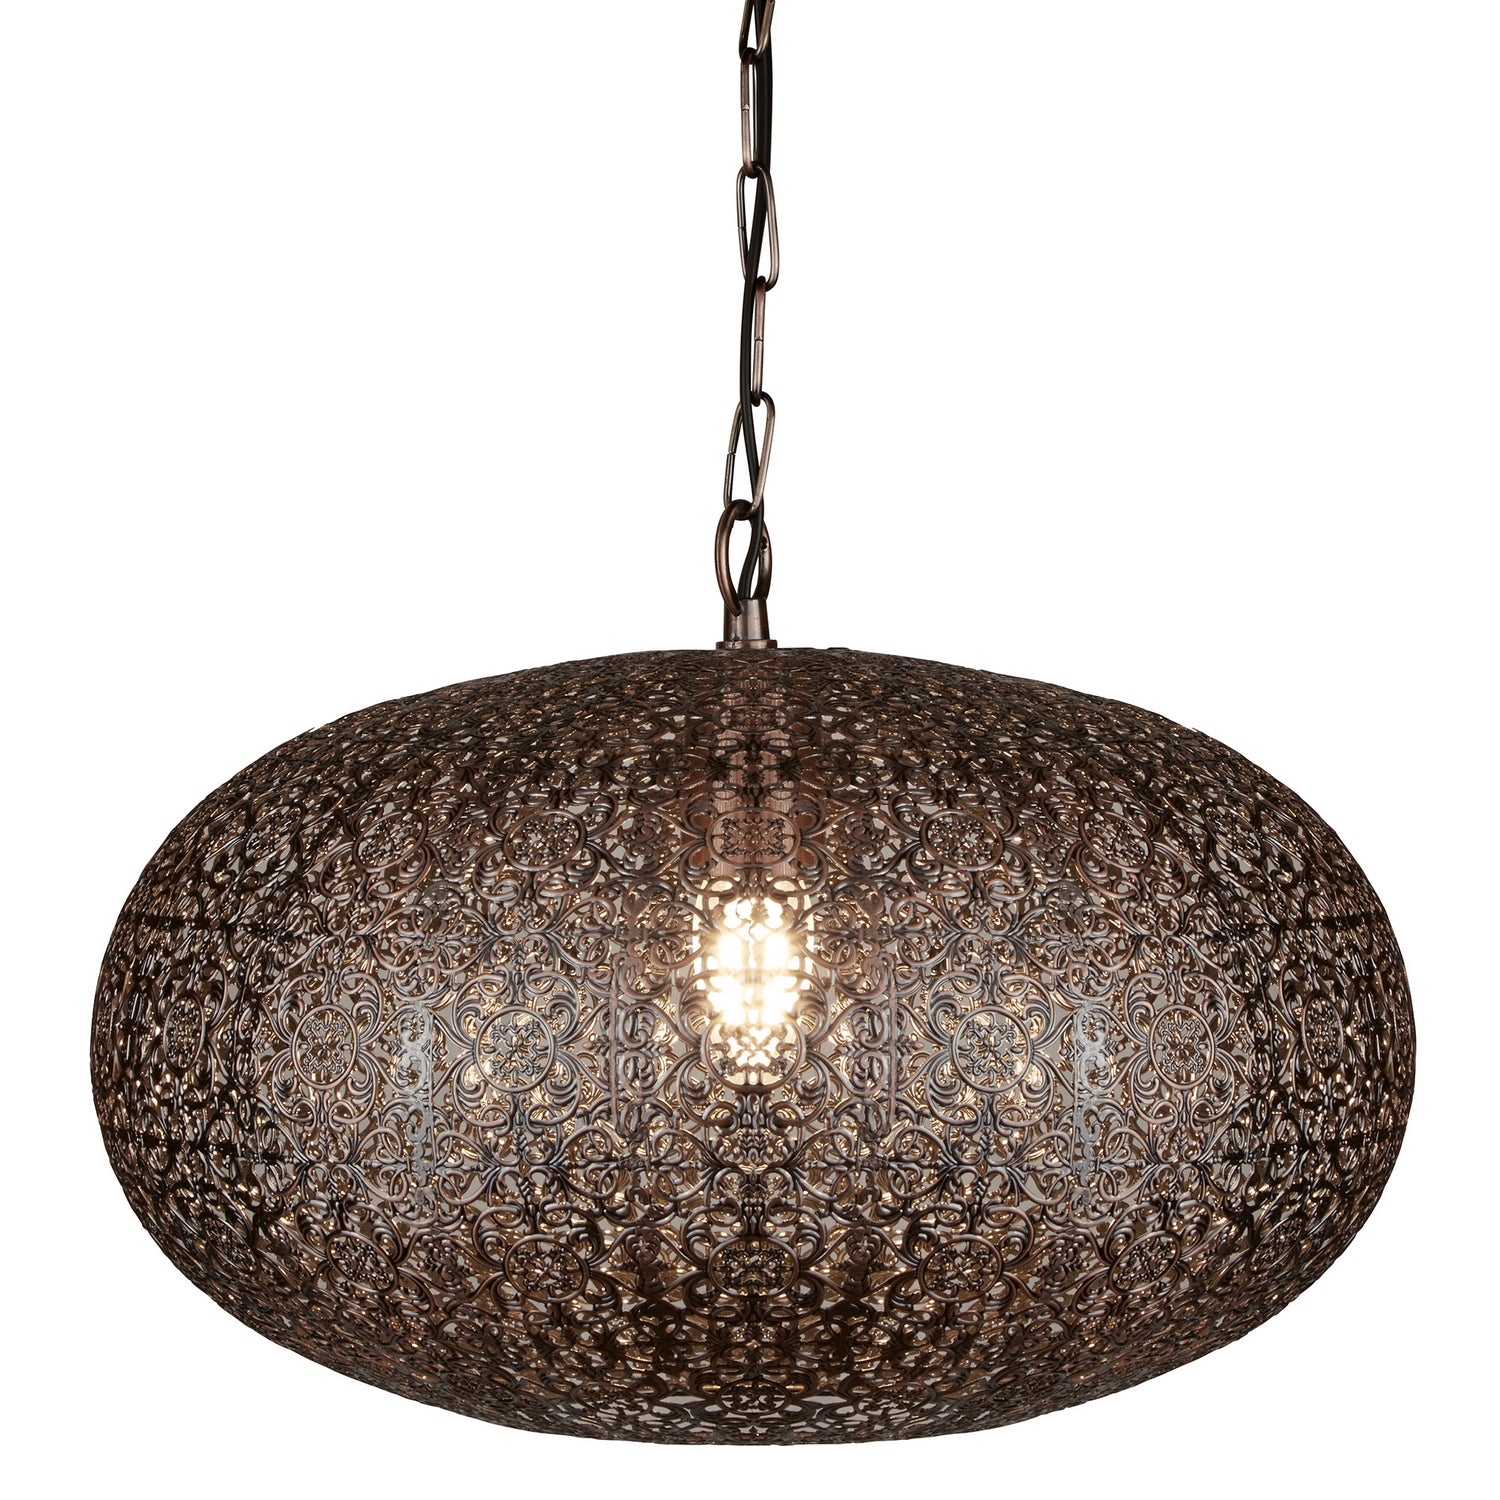 Fretwork Antique Copper Moroccan Style Shade Ceiling Pendant Light